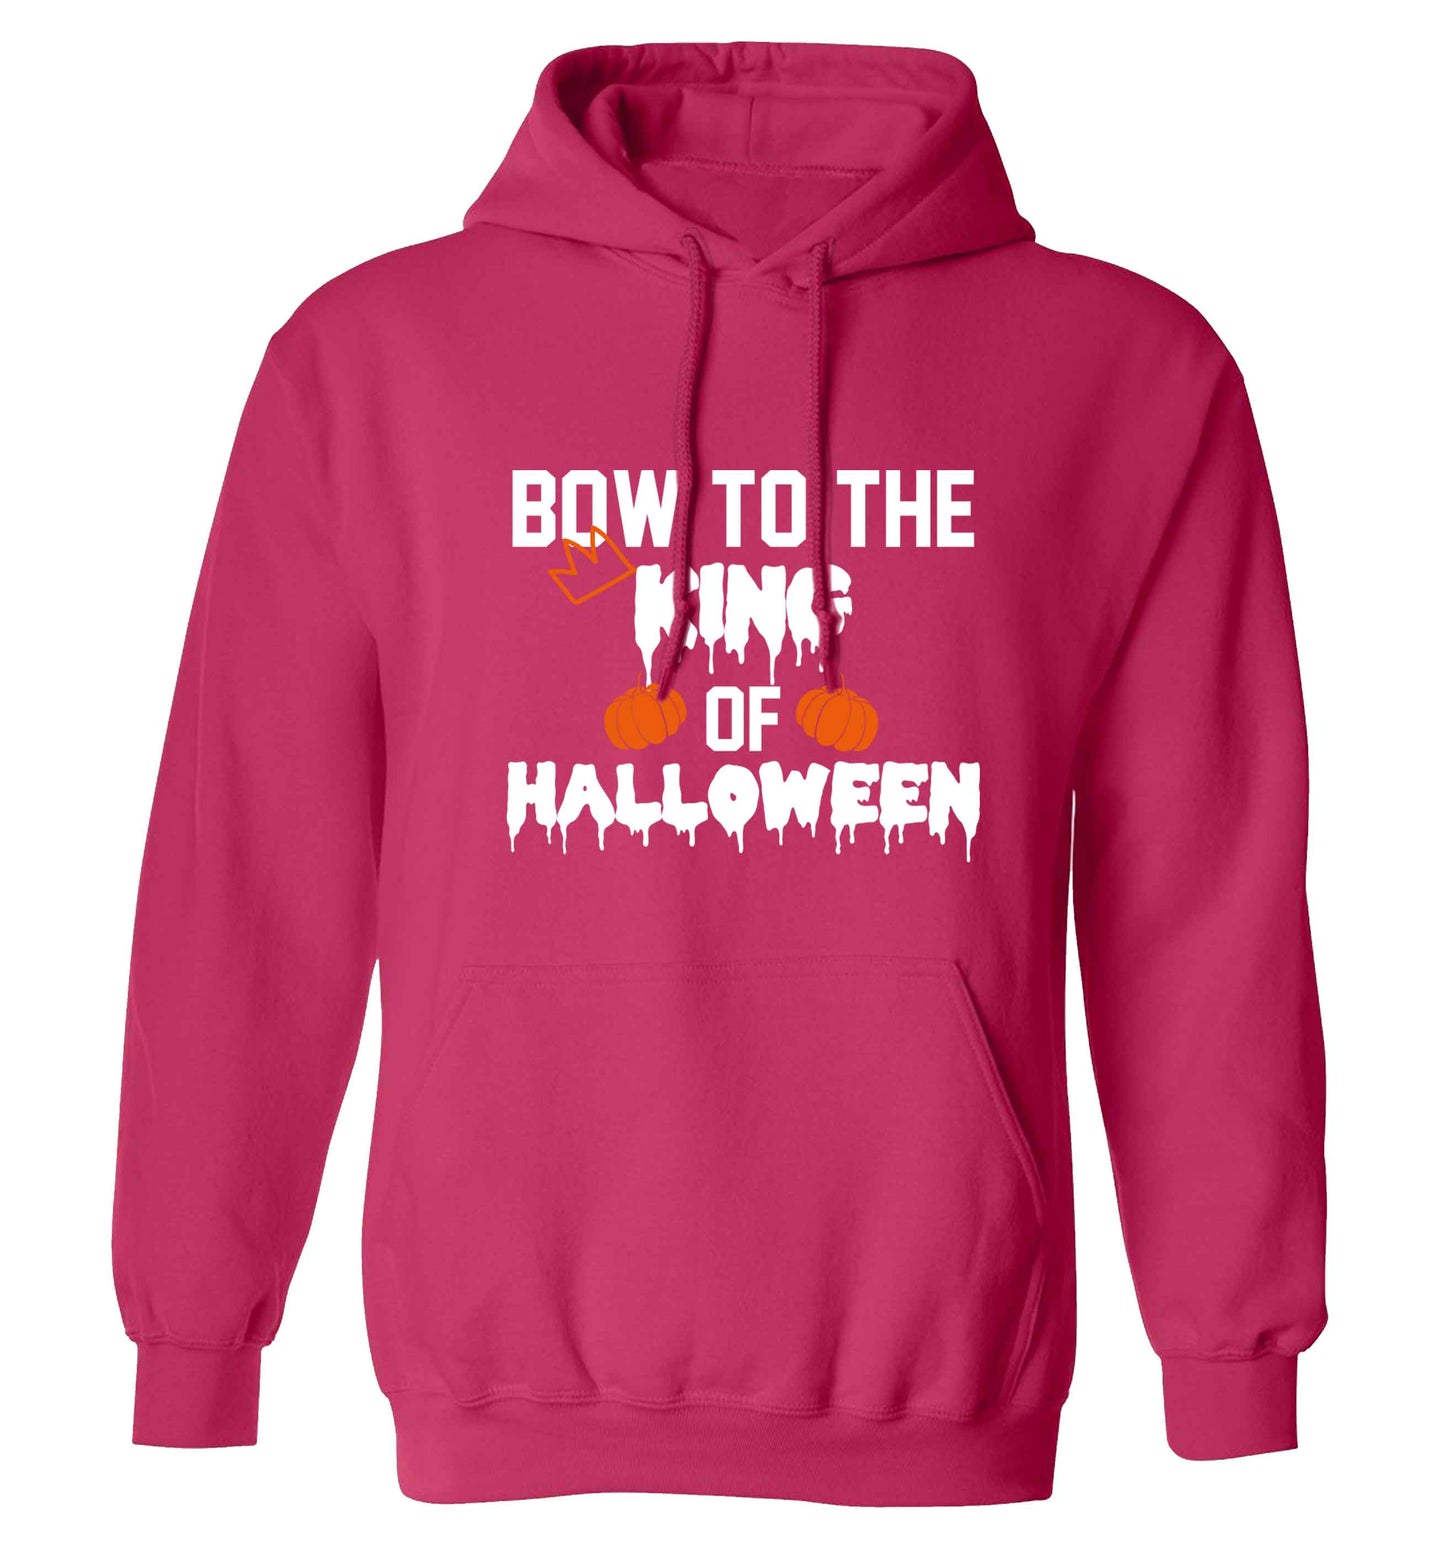 Bow to the King of halloween adults unisex pink hoodie 2XL